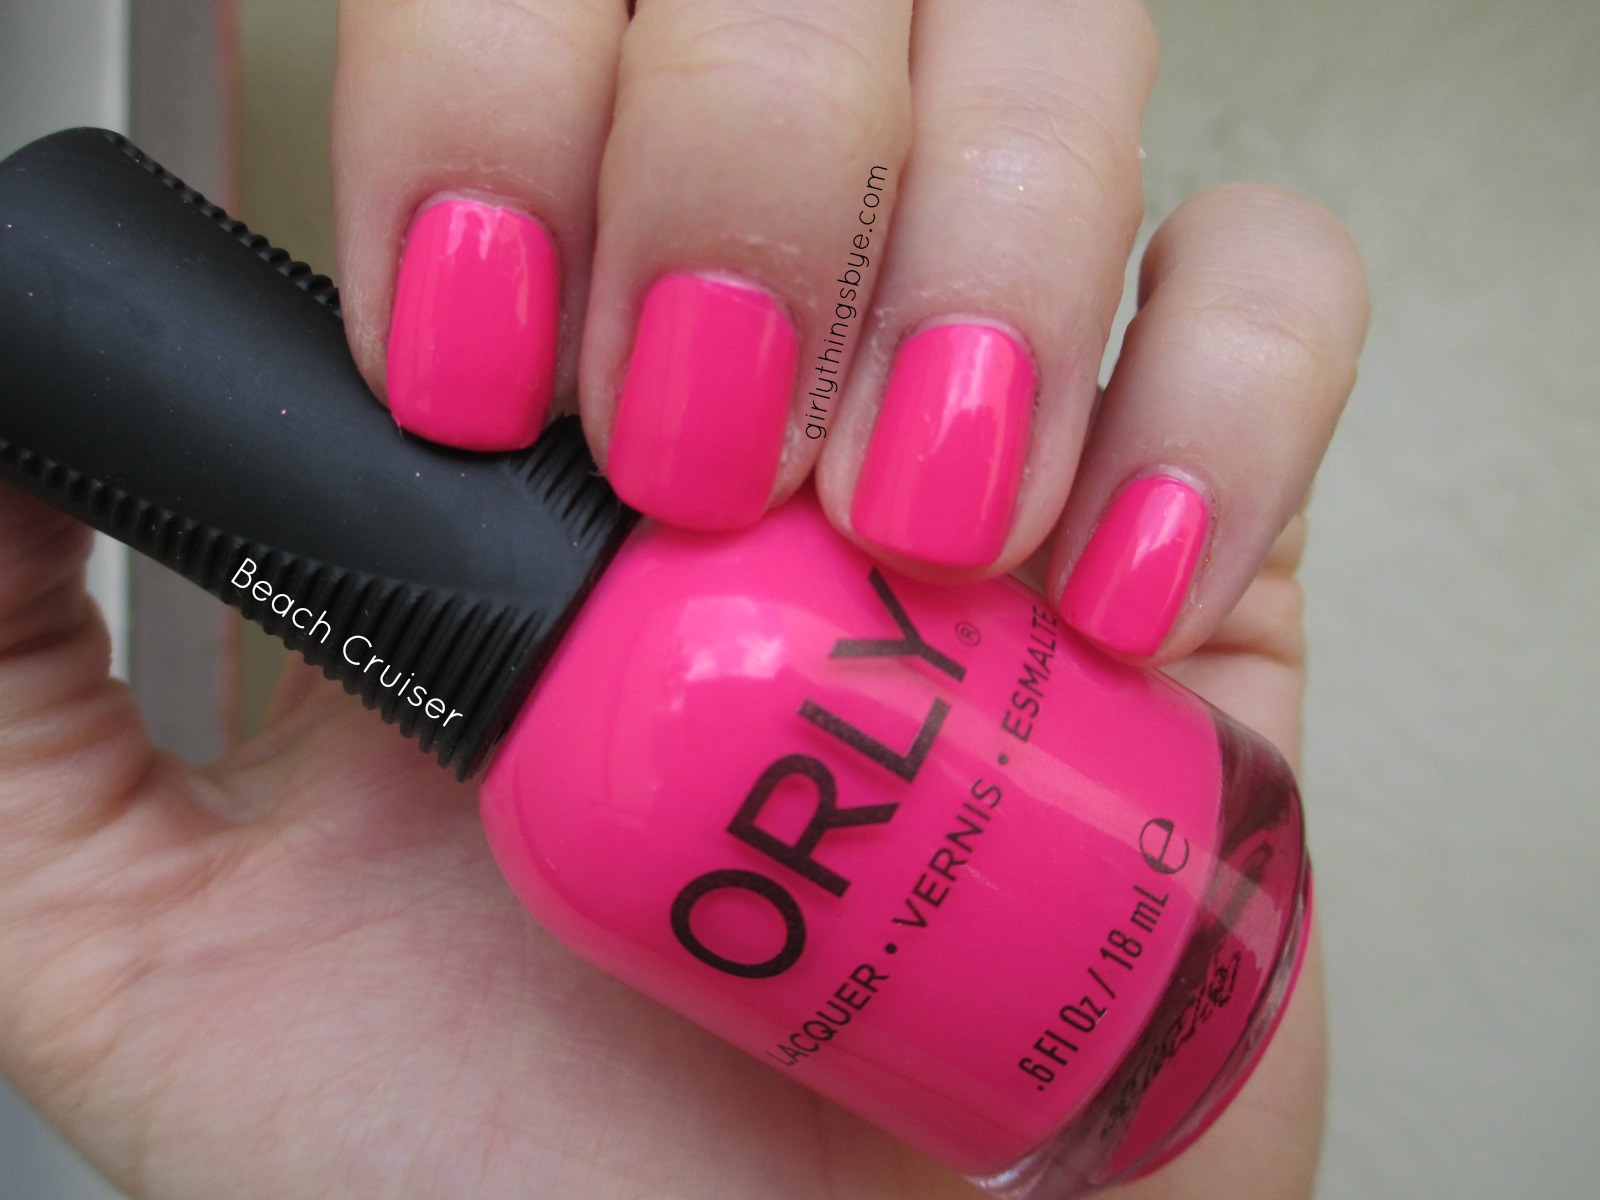 10. Orly Nail Lacquer in "Beach Cruiser" - wide 7